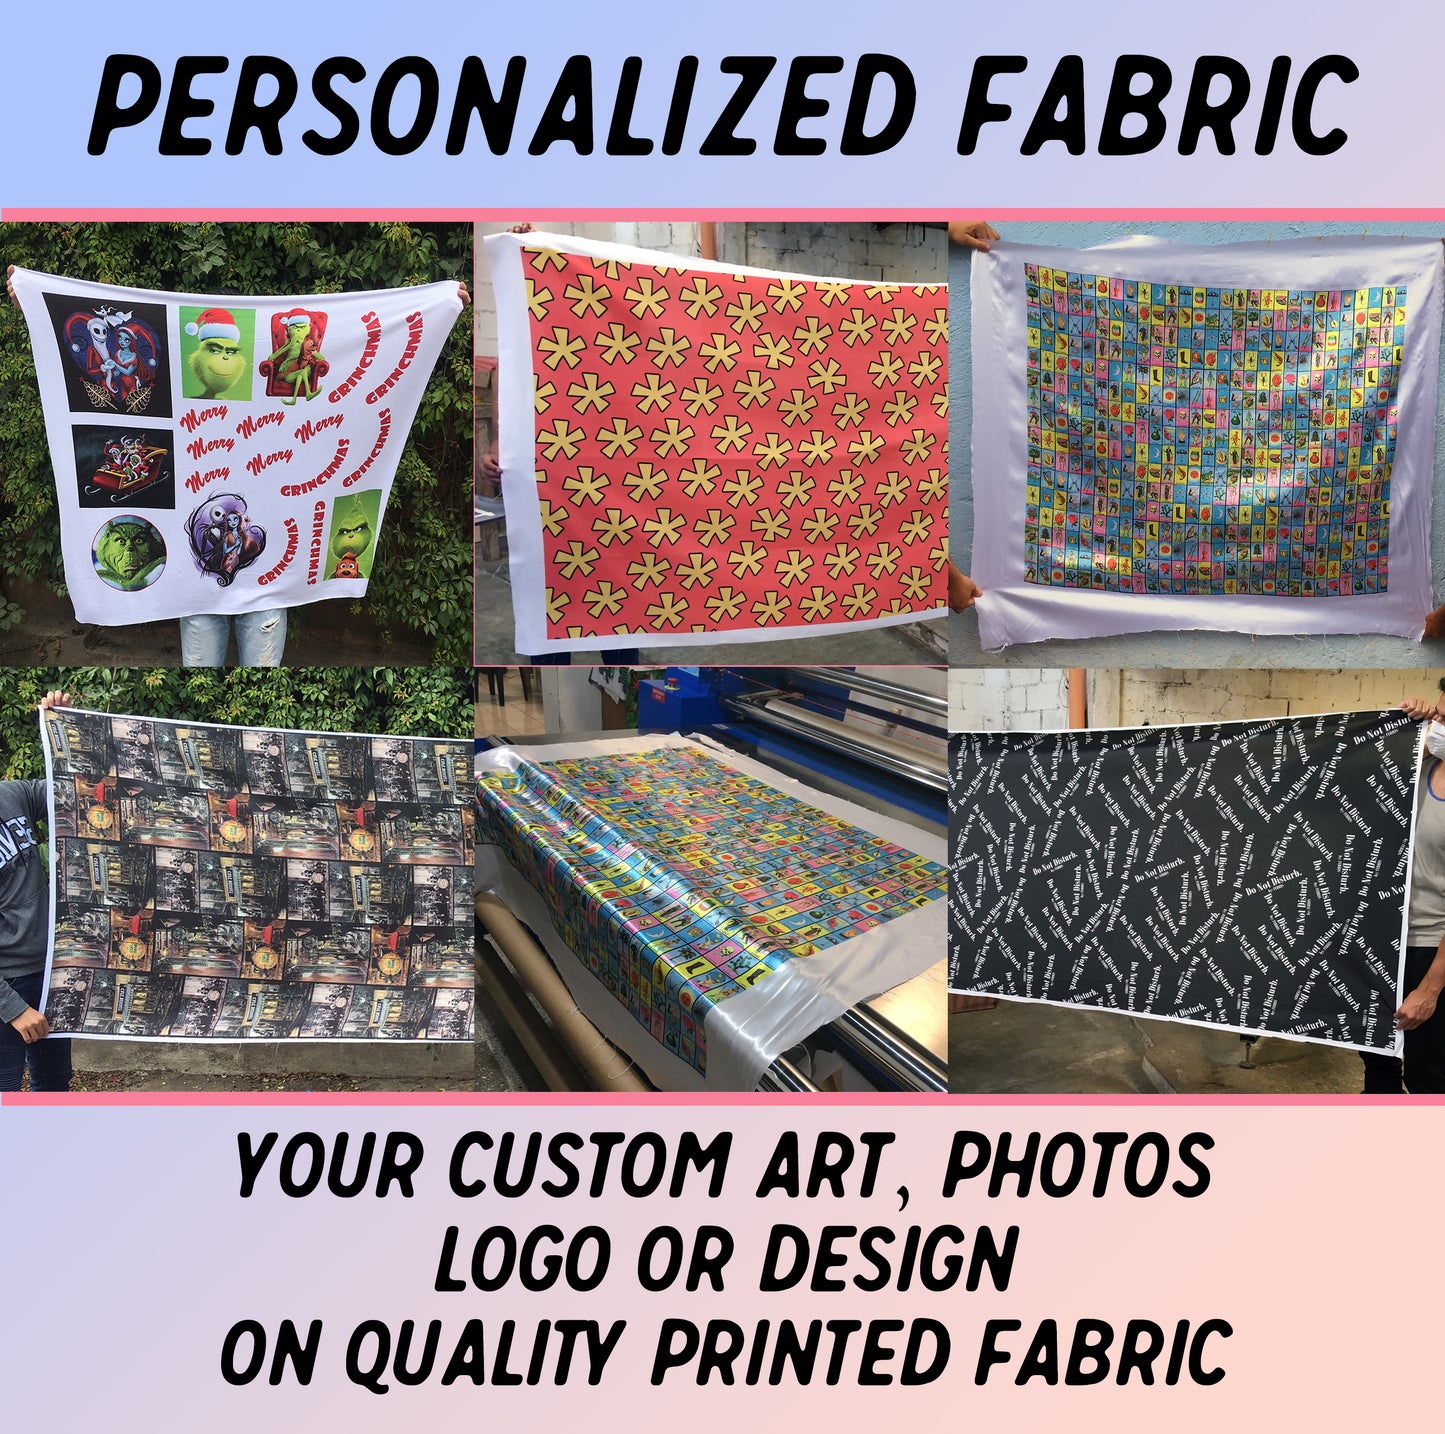 Personalized Fabric Printed with your Custom Design Art, Logo, Photo or Pattern.